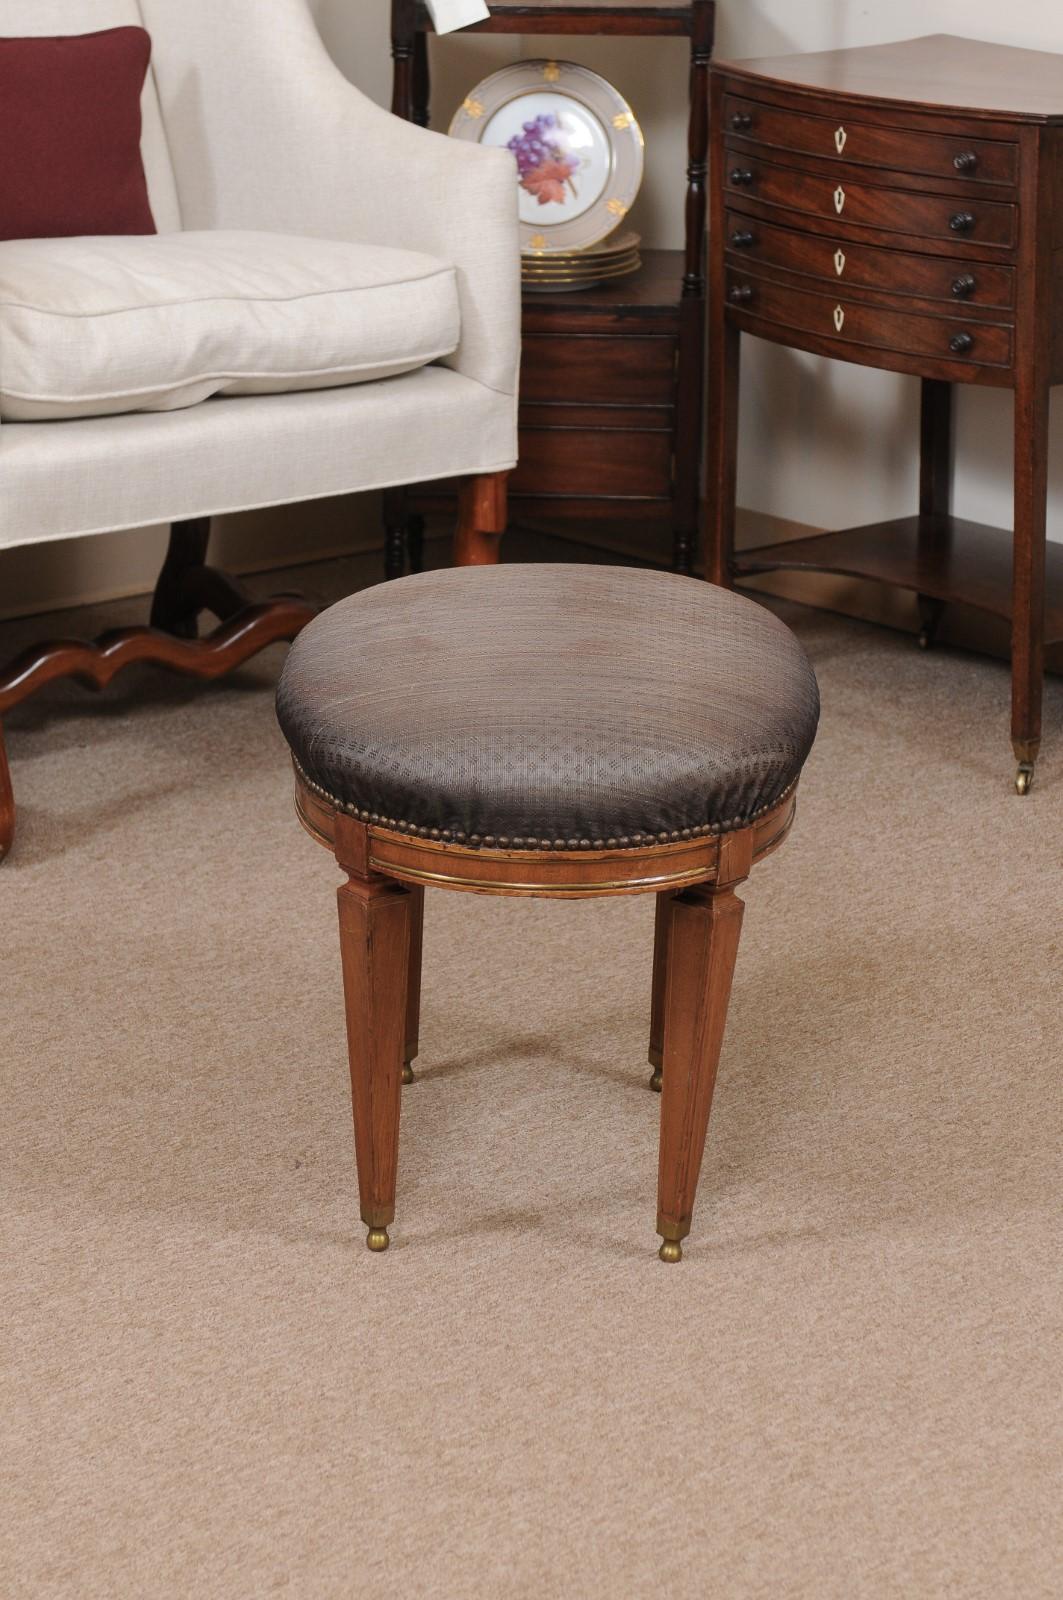 20th Century Neoclassical Style Walnut Stool with Brass Inlay & Oval Upholstered Seat For Sale